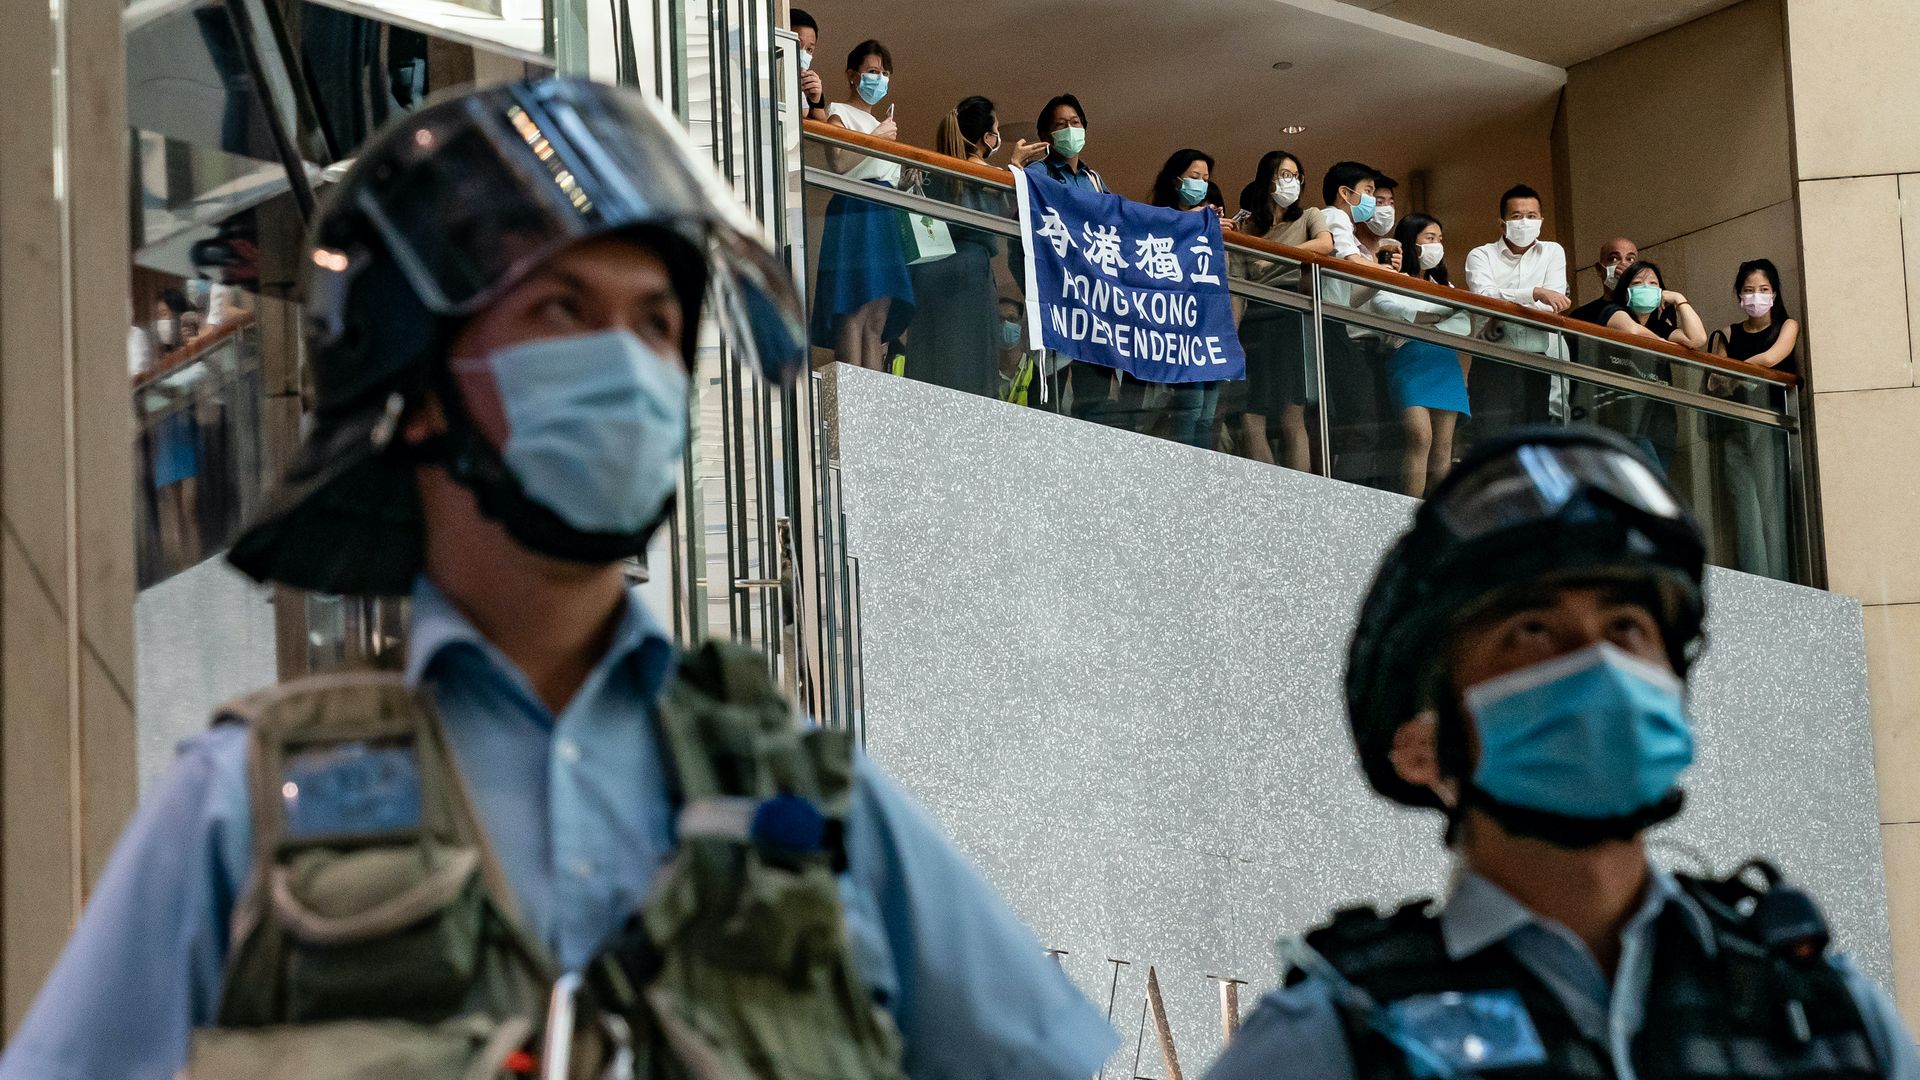 Pro-democracy supporters hold a Hong Kong Independence flag and shout slogans during a rally against the national security law as riot police secure an area in a shopping mall on June 30 in Hong Kong